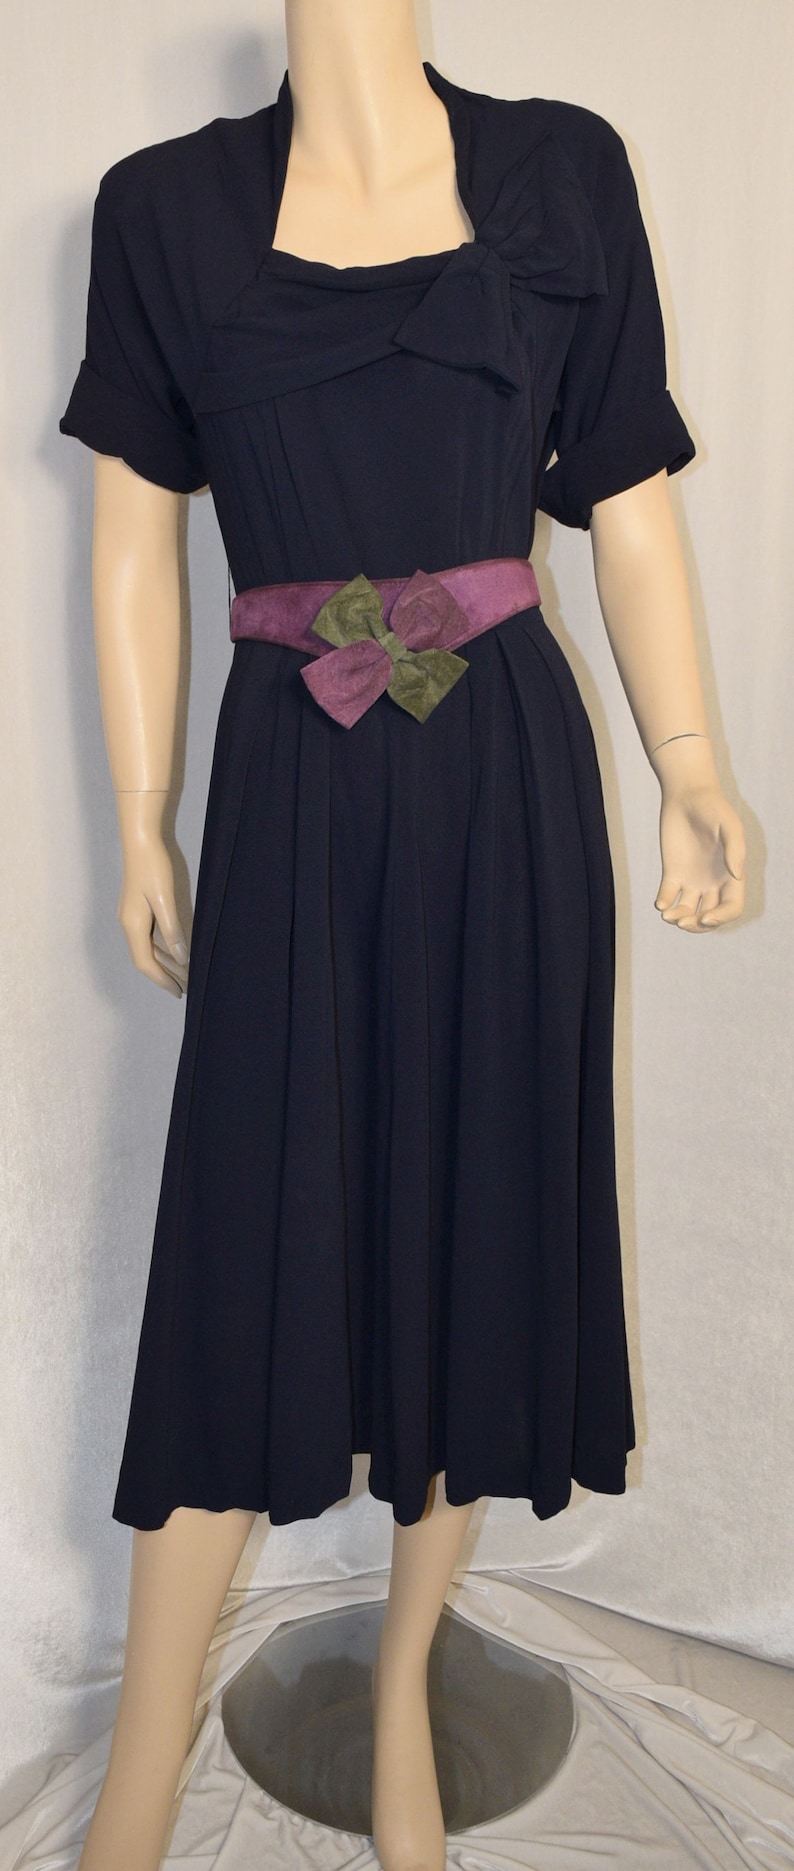 VINTAGE 1940s POLLY BRIEF Navy Blue Crepe Bow Accent Dress image 4